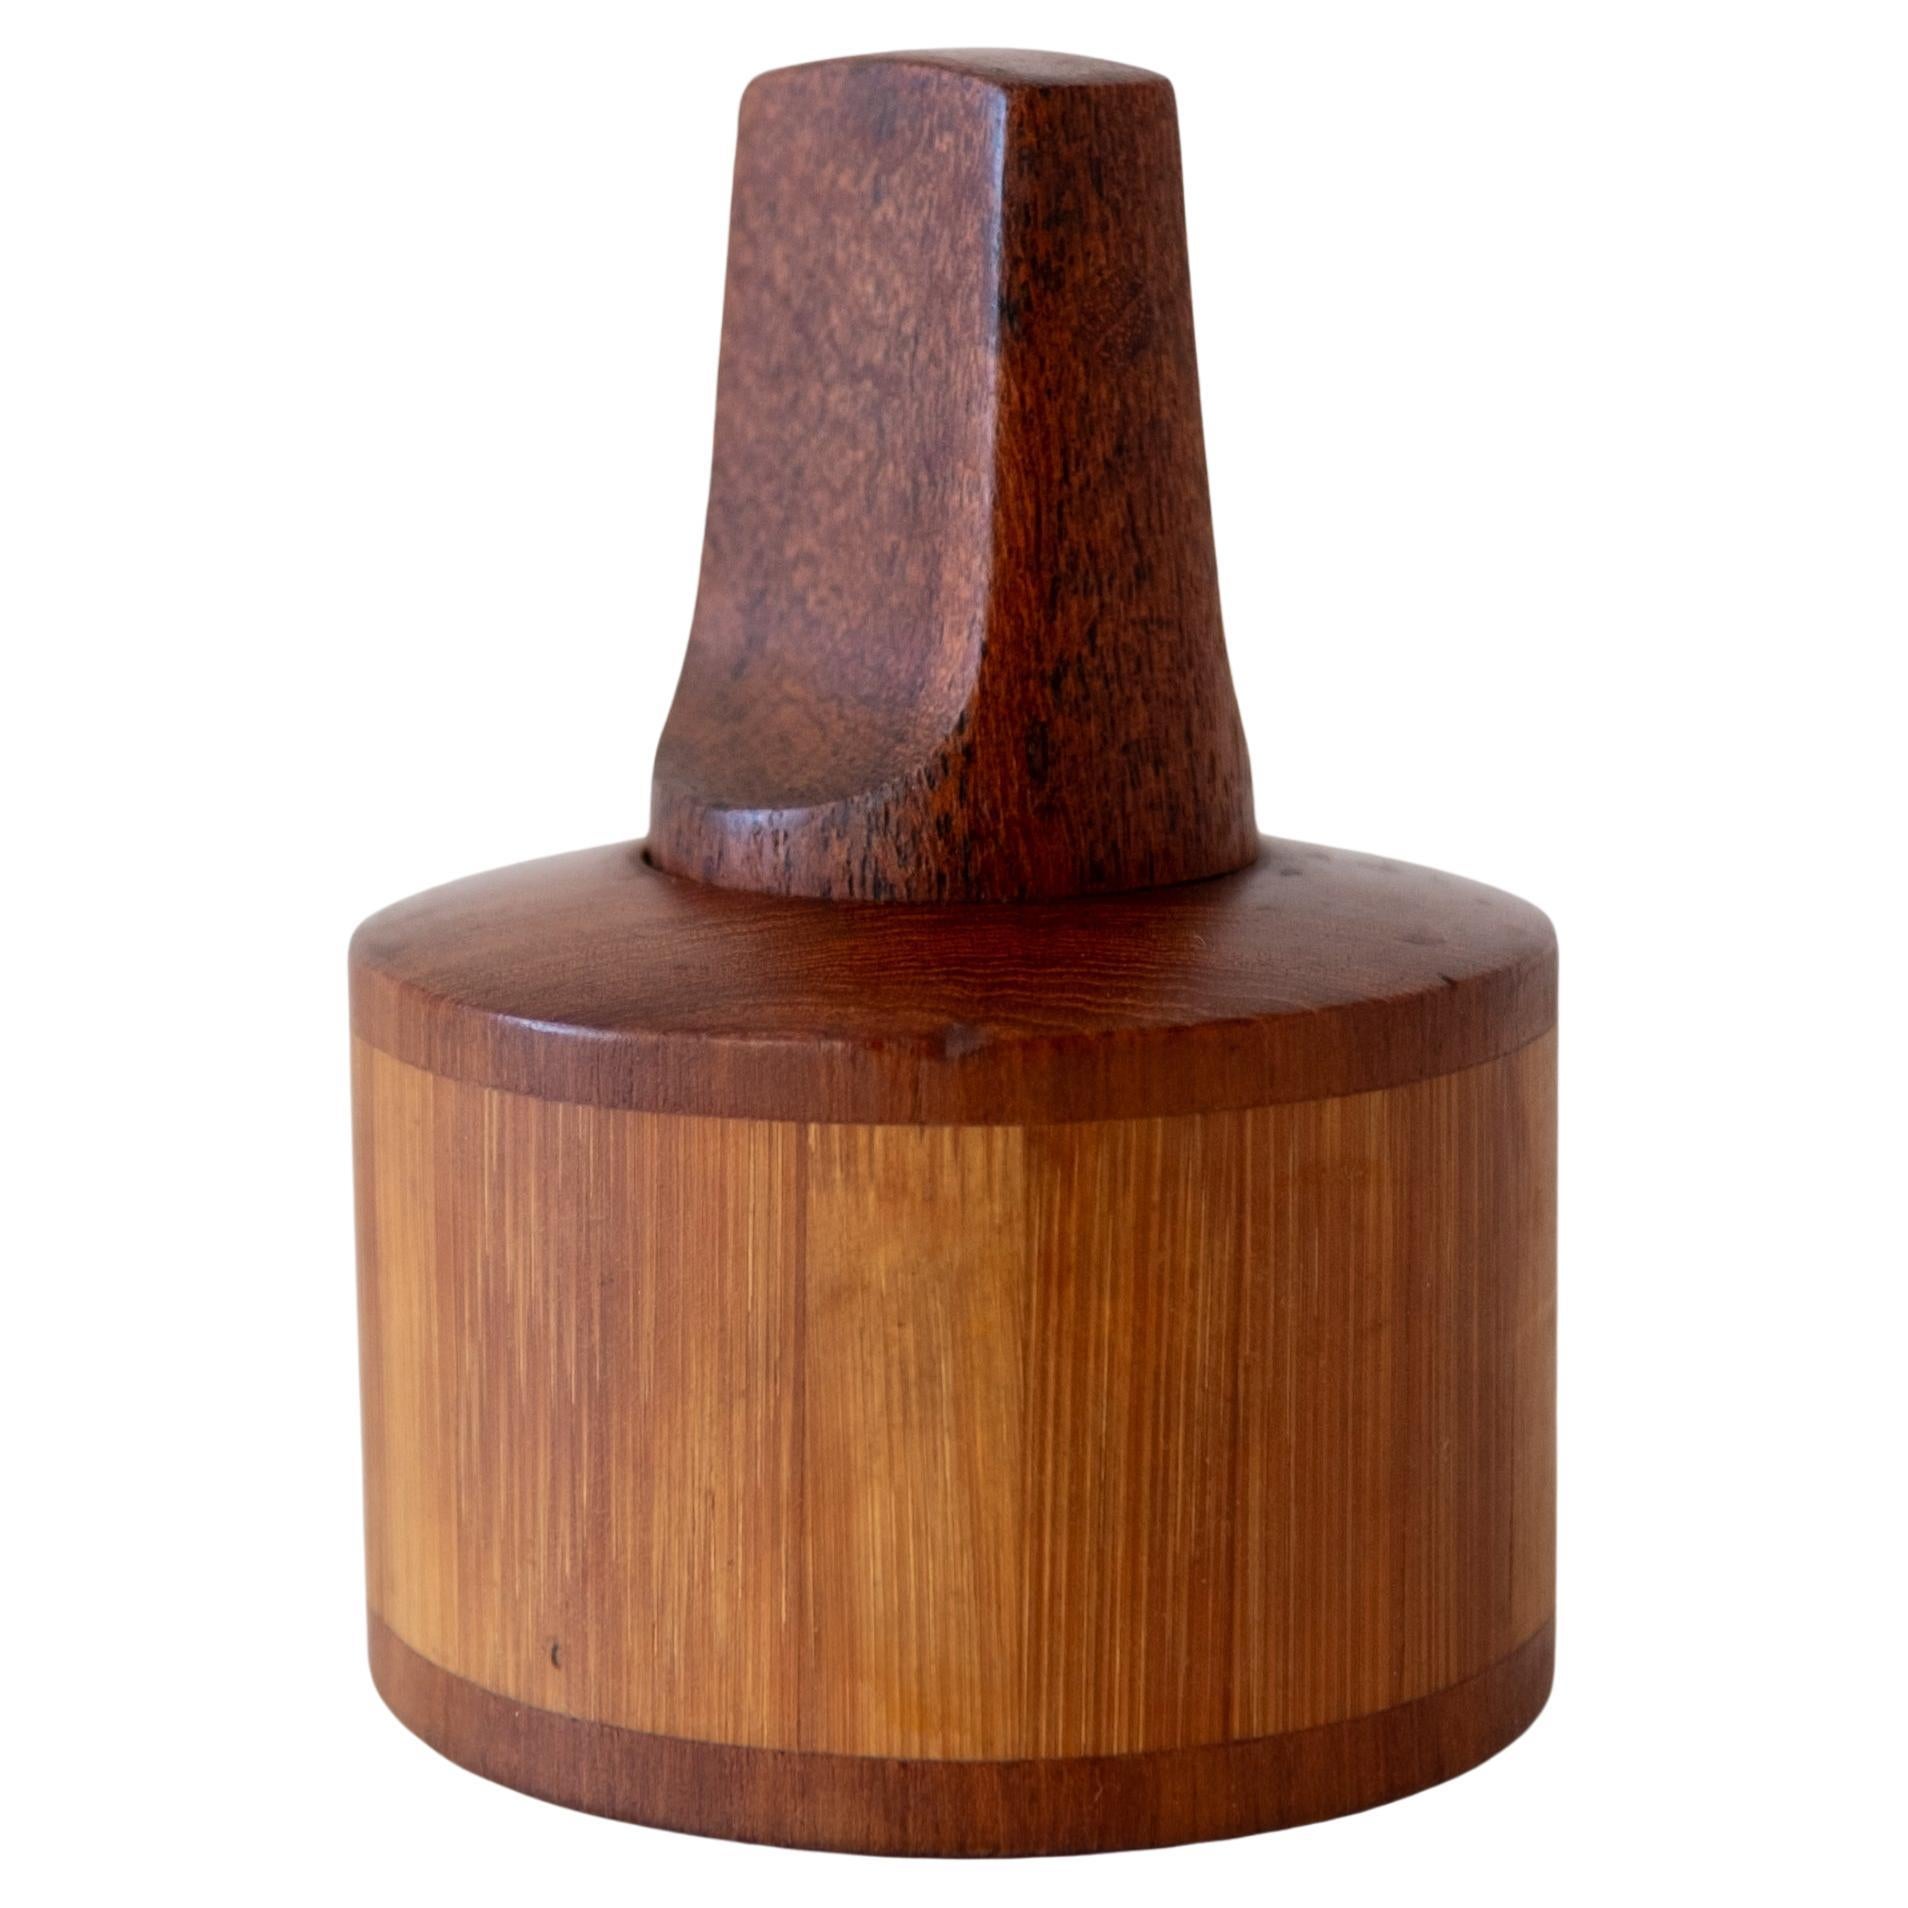 Rare Pepper Mill by Jens H. Quistgaard for Dansk